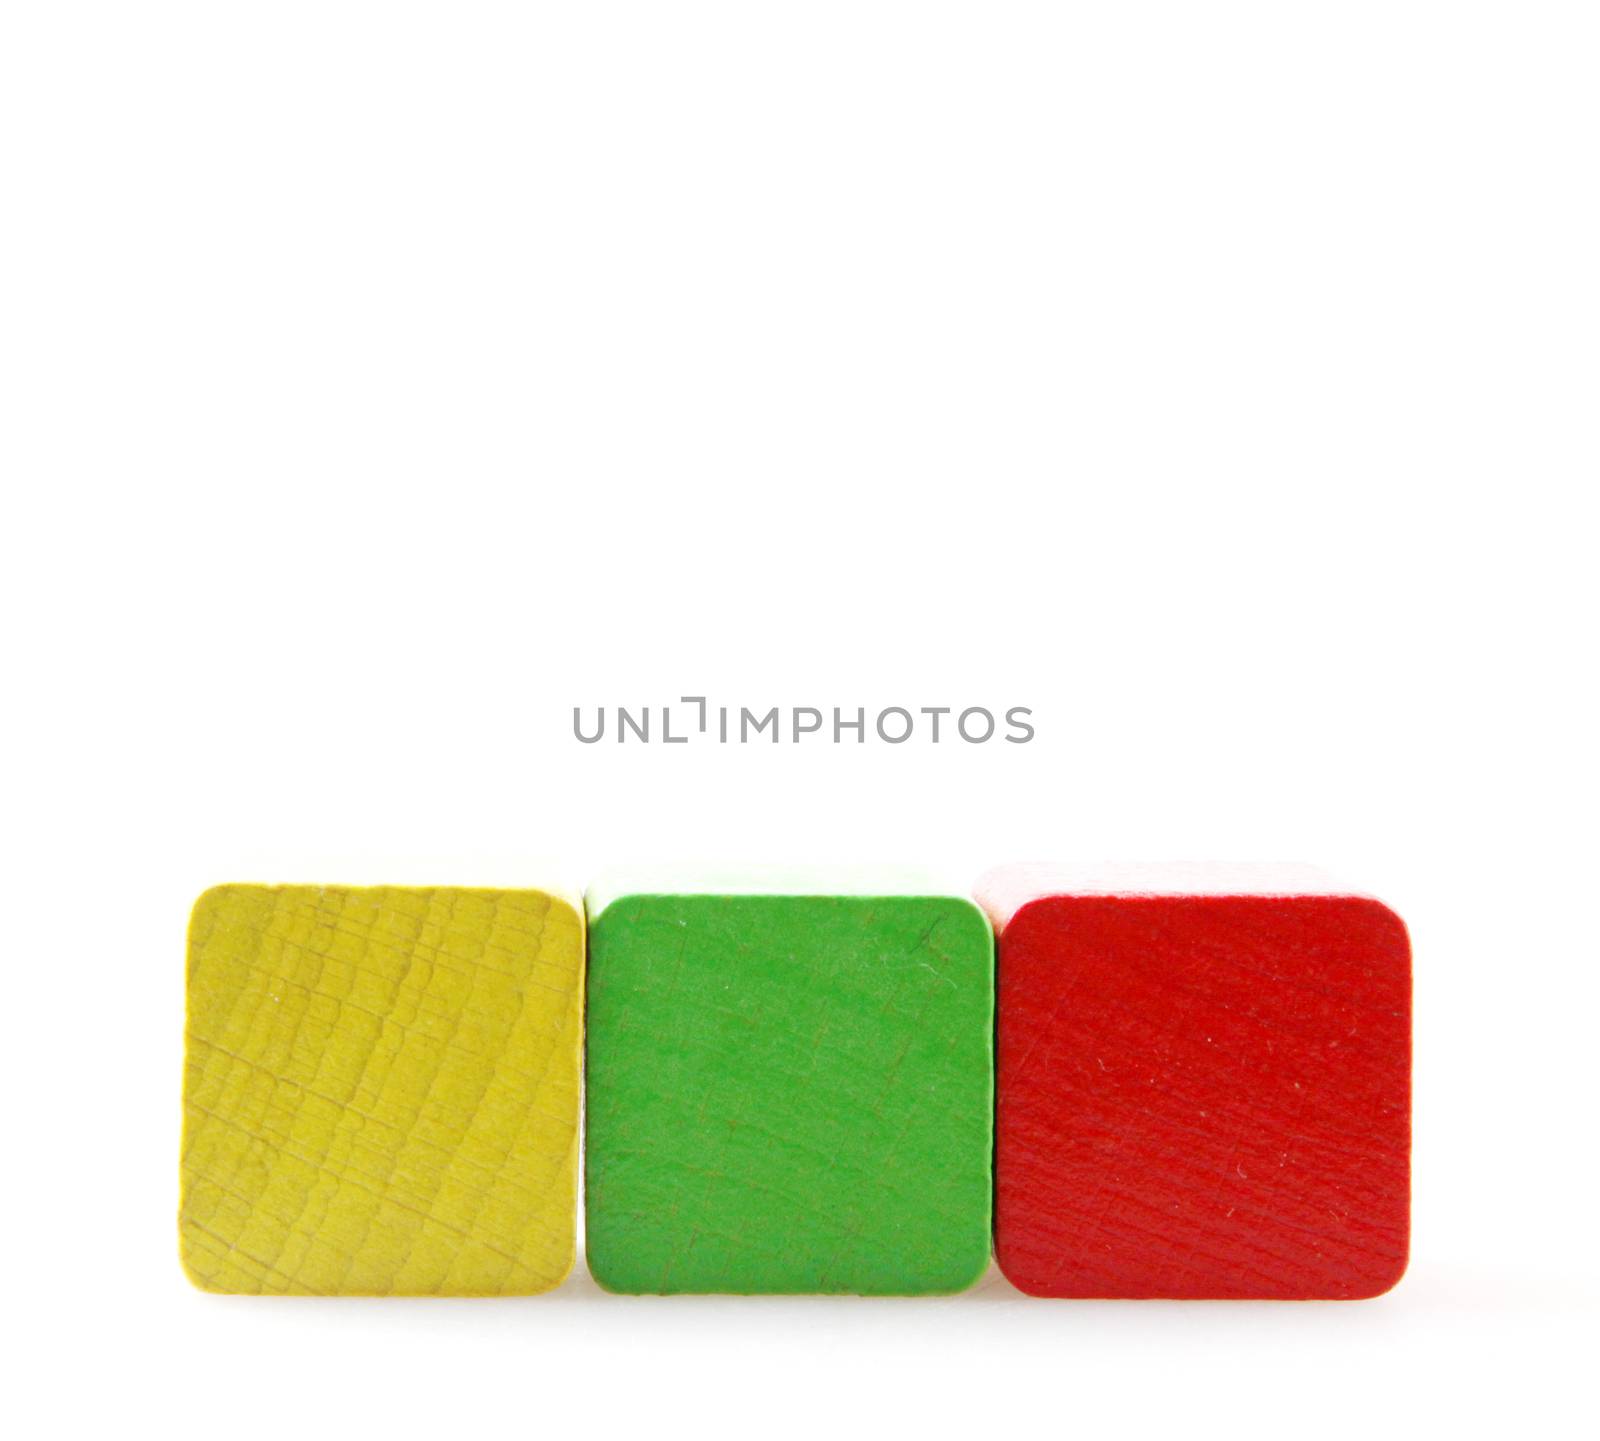 Colorful Wooden Blocks Isolated On White Background